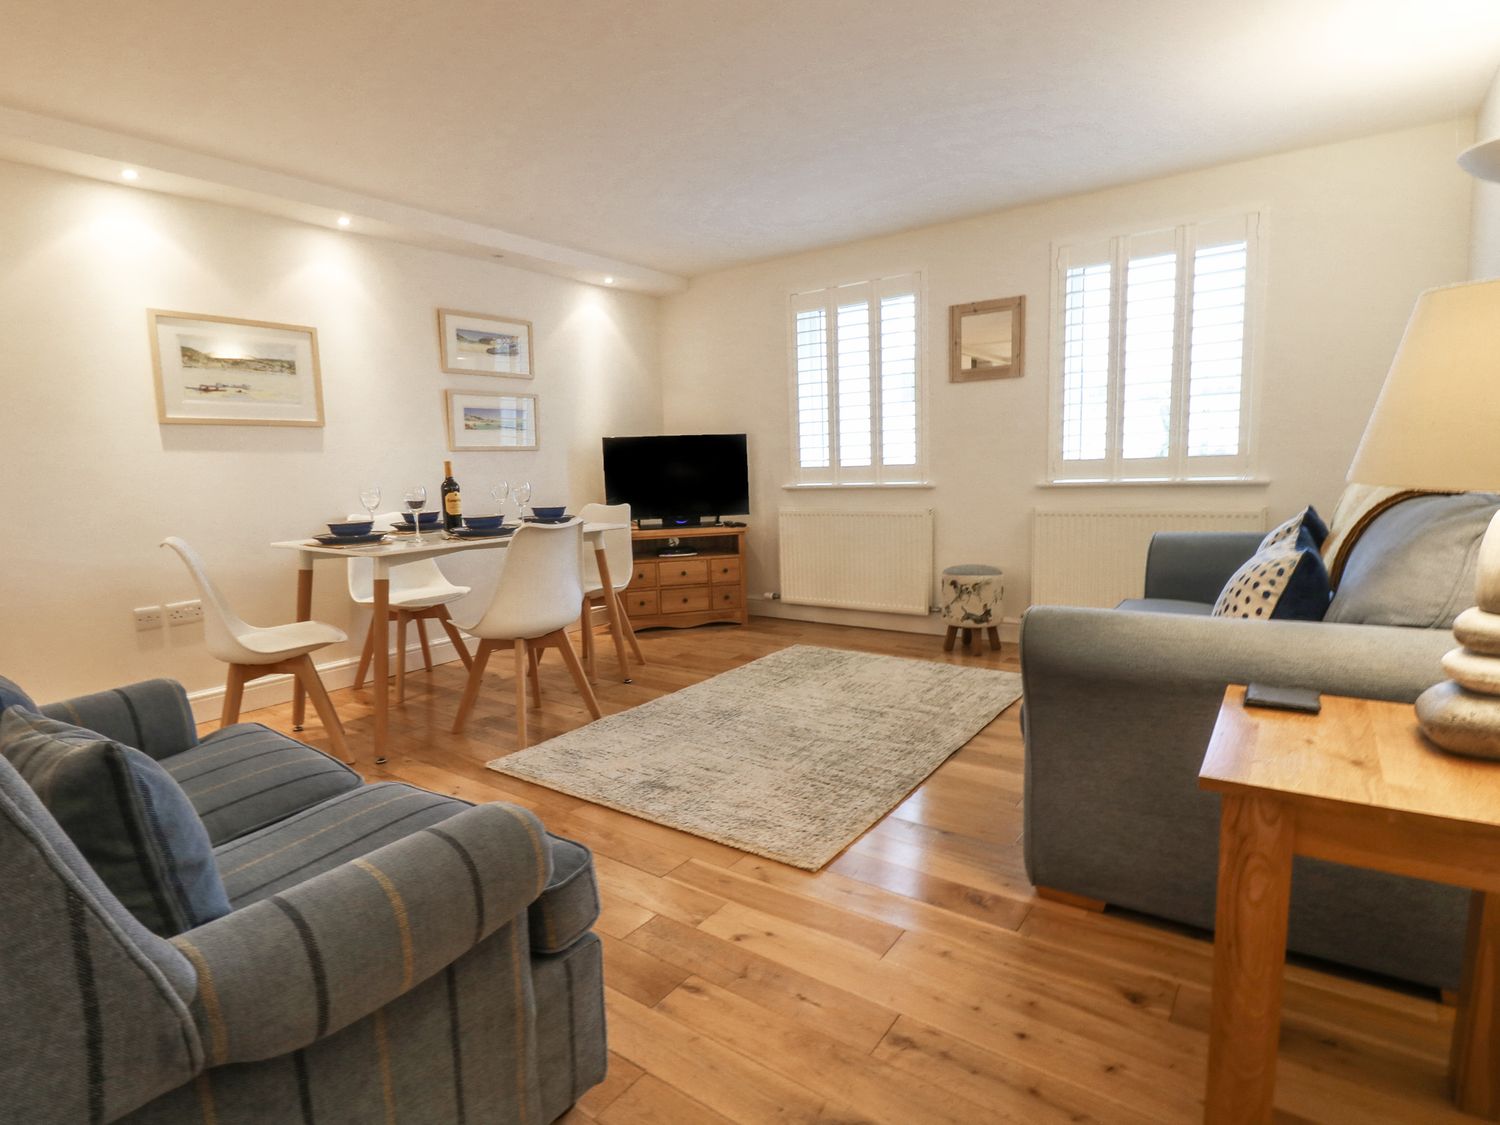 Harbour House Apartment - Cornwall - 959244 - photo 1